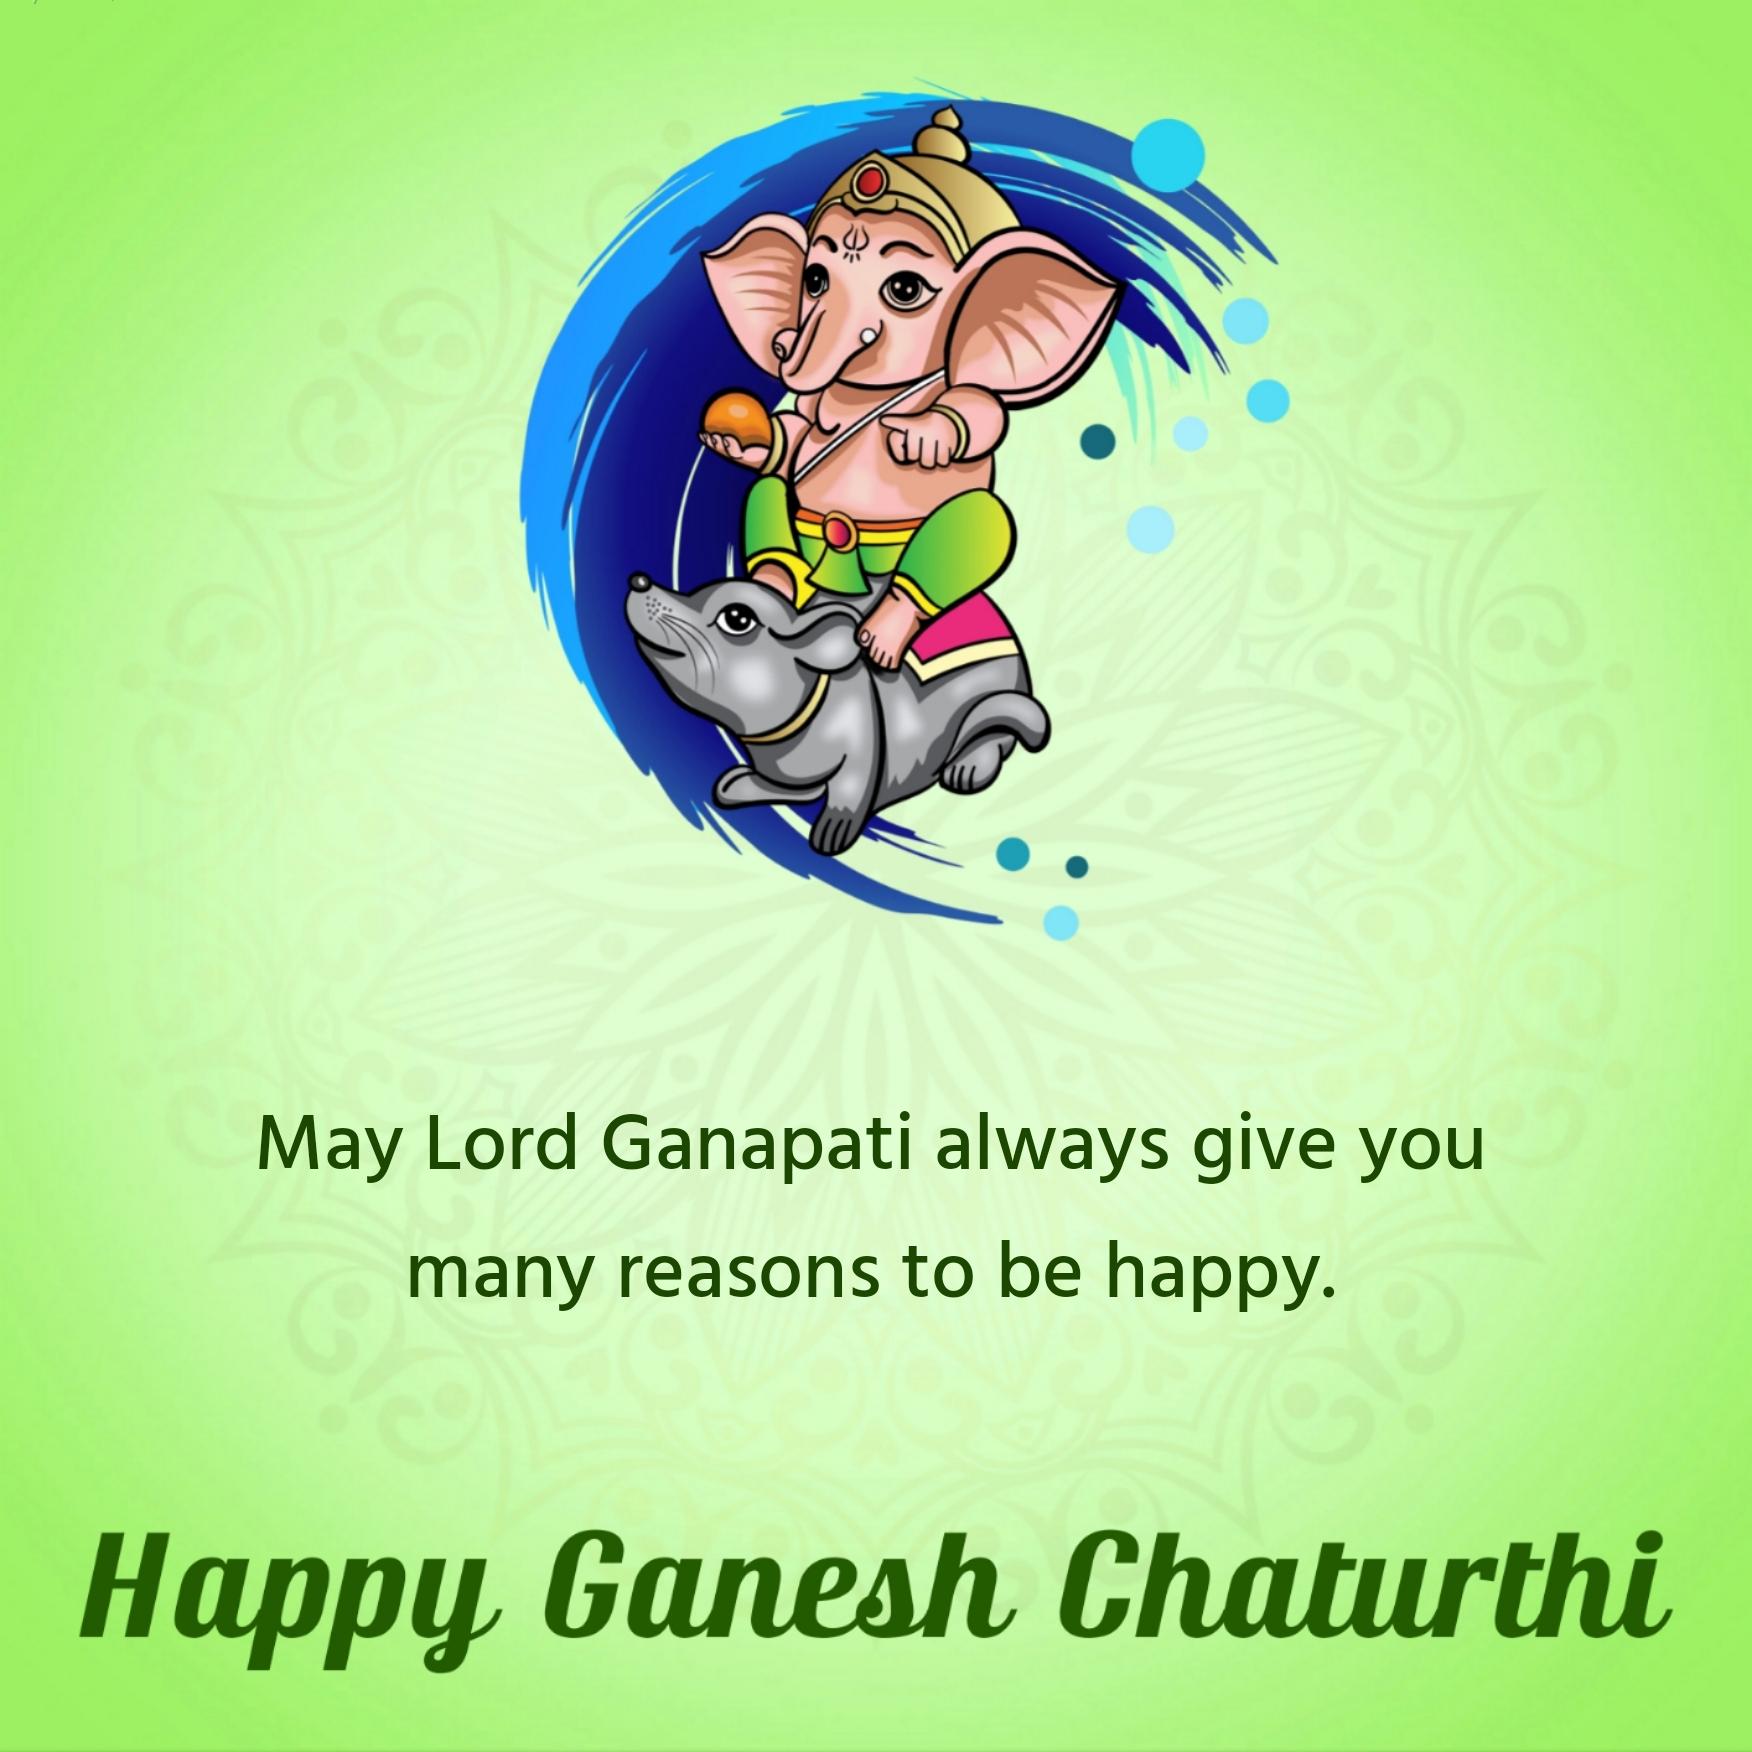 May Lord Ganapati always give you many reasons to be happy